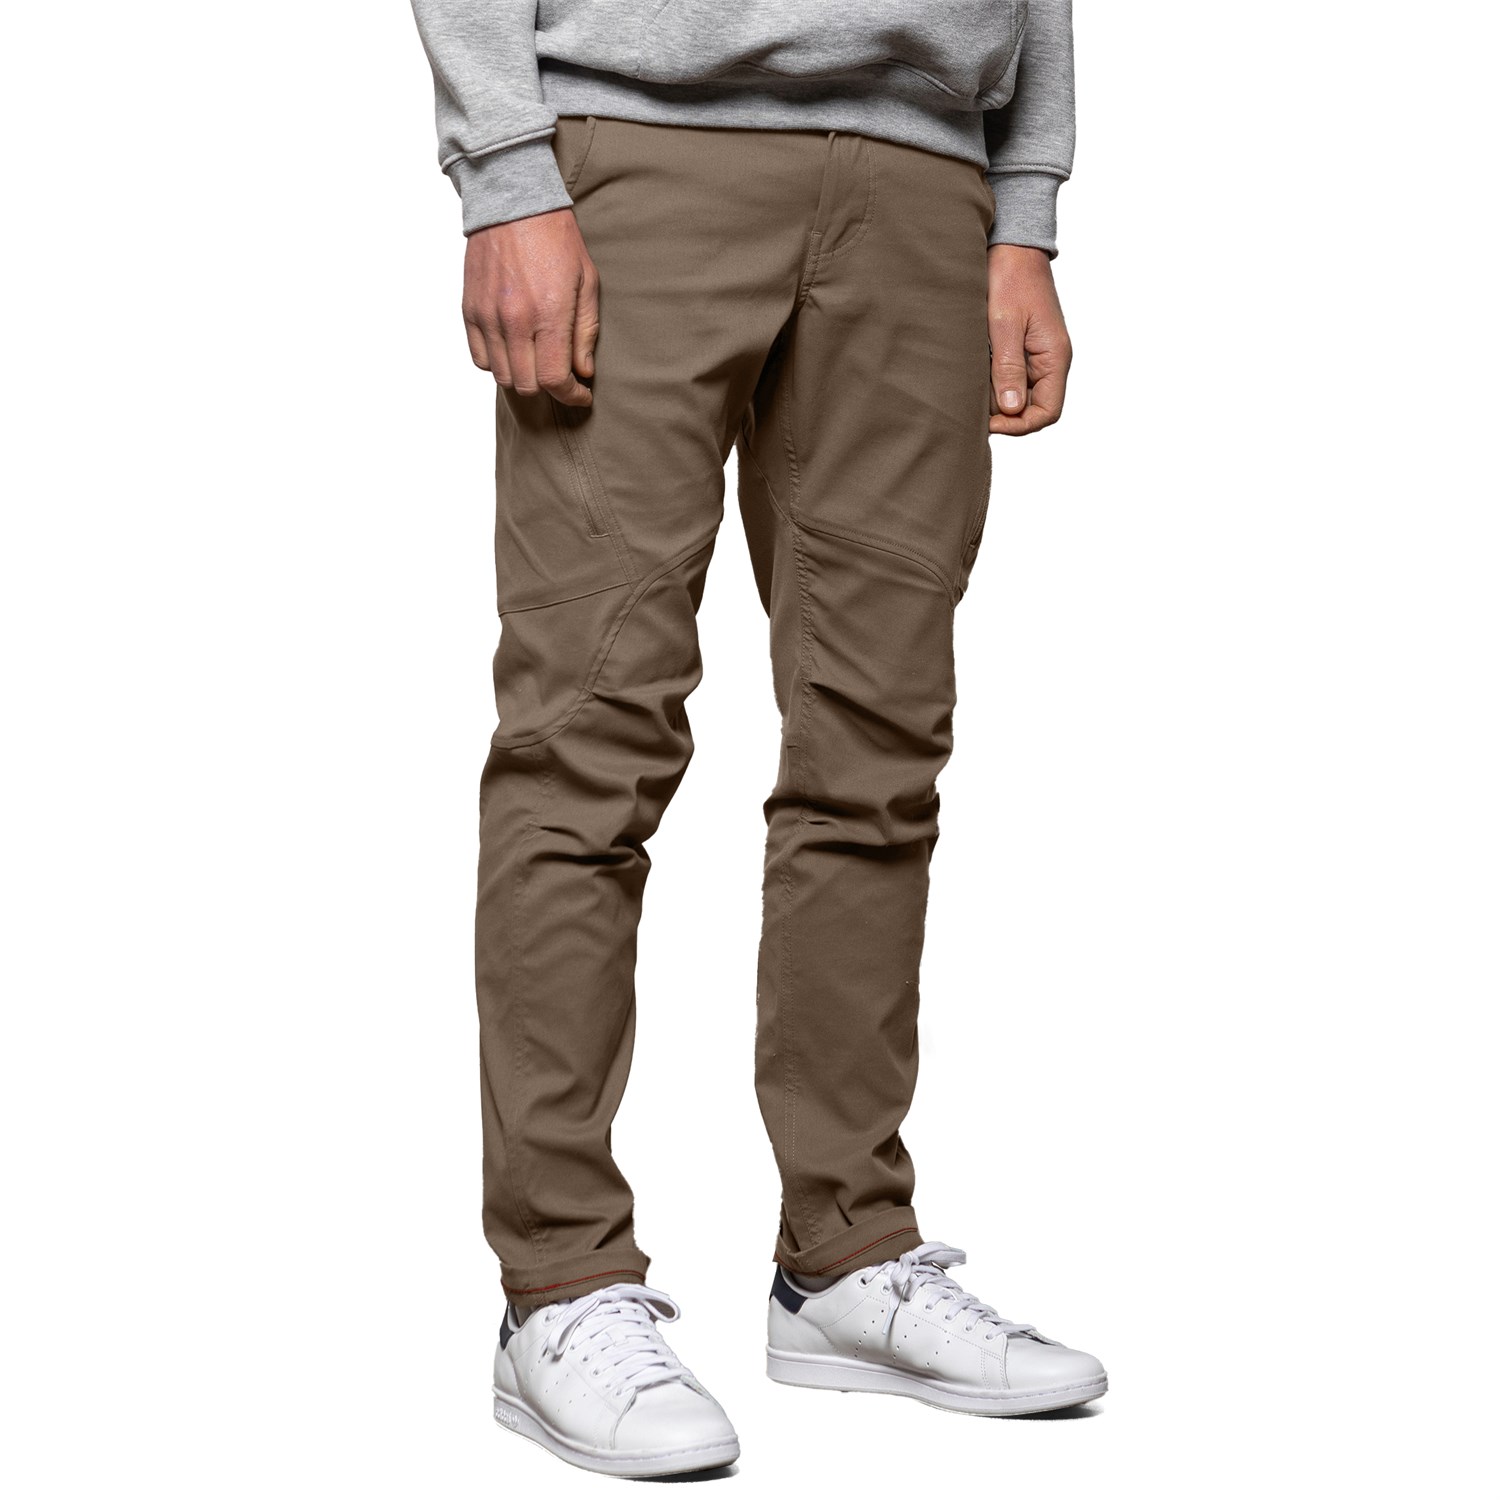 цена Брюки 686 Multi Anything Cargo- Relaxed Fit, цвет Tobacco